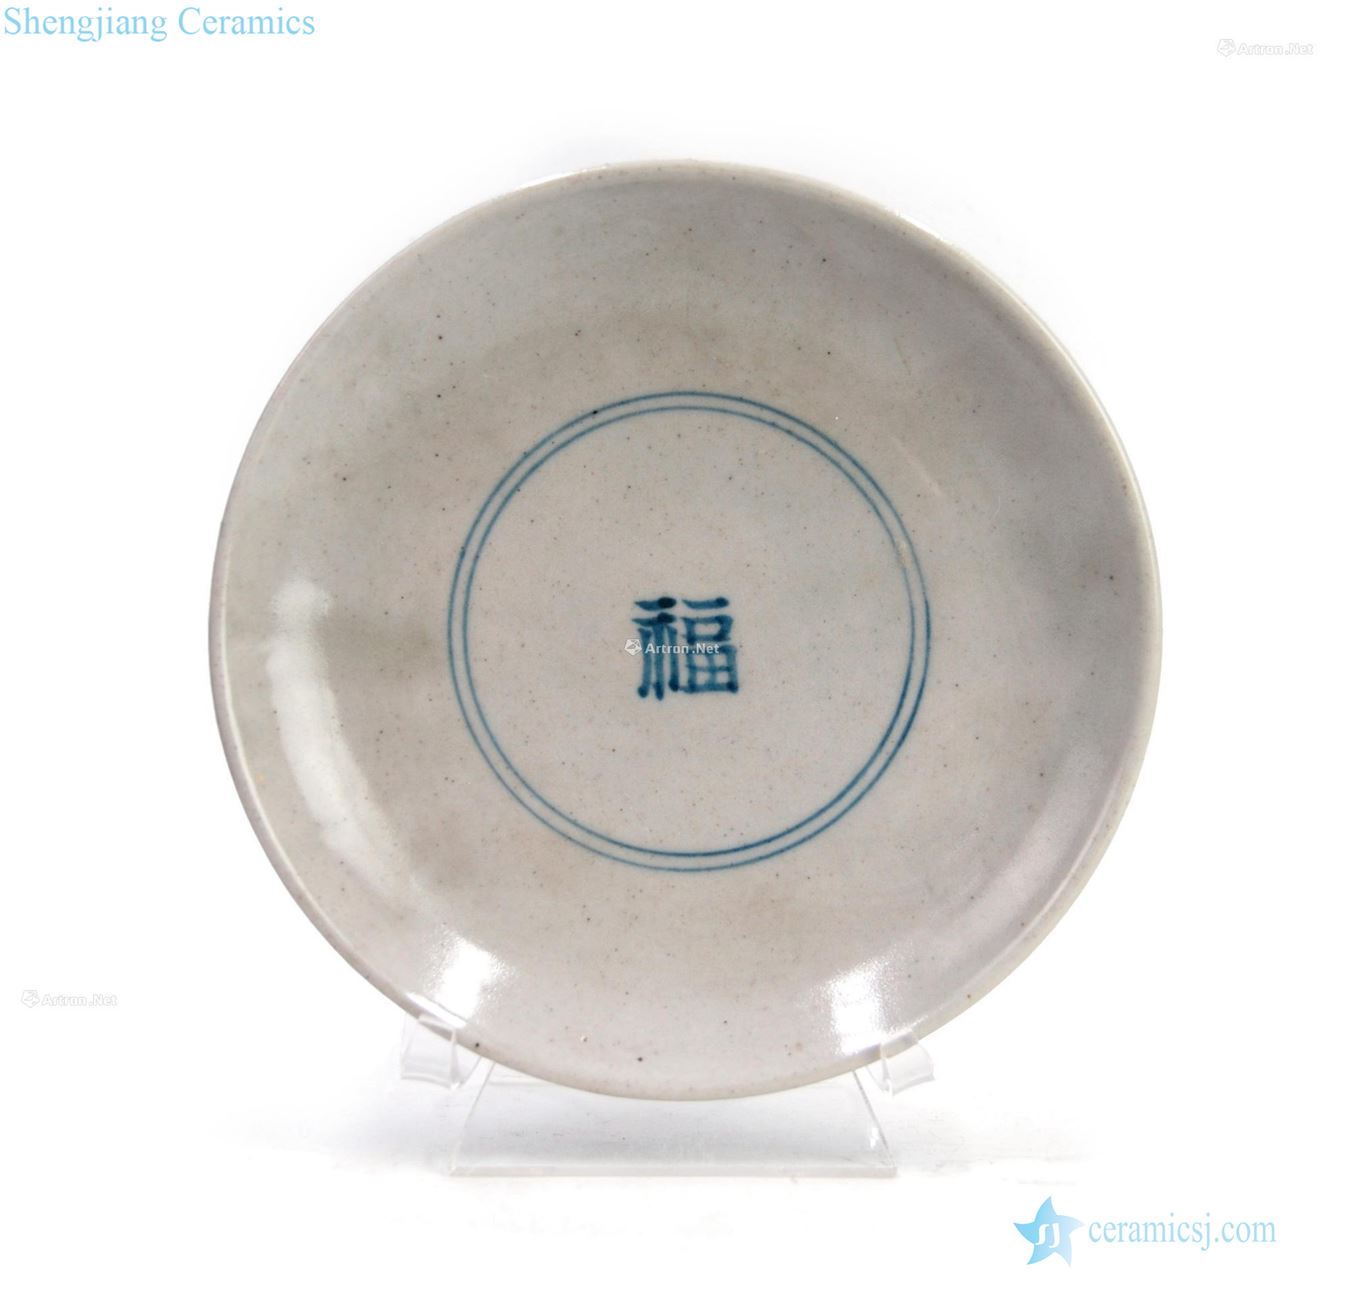 Chosun dynasty (1392-1392) blue and white plate